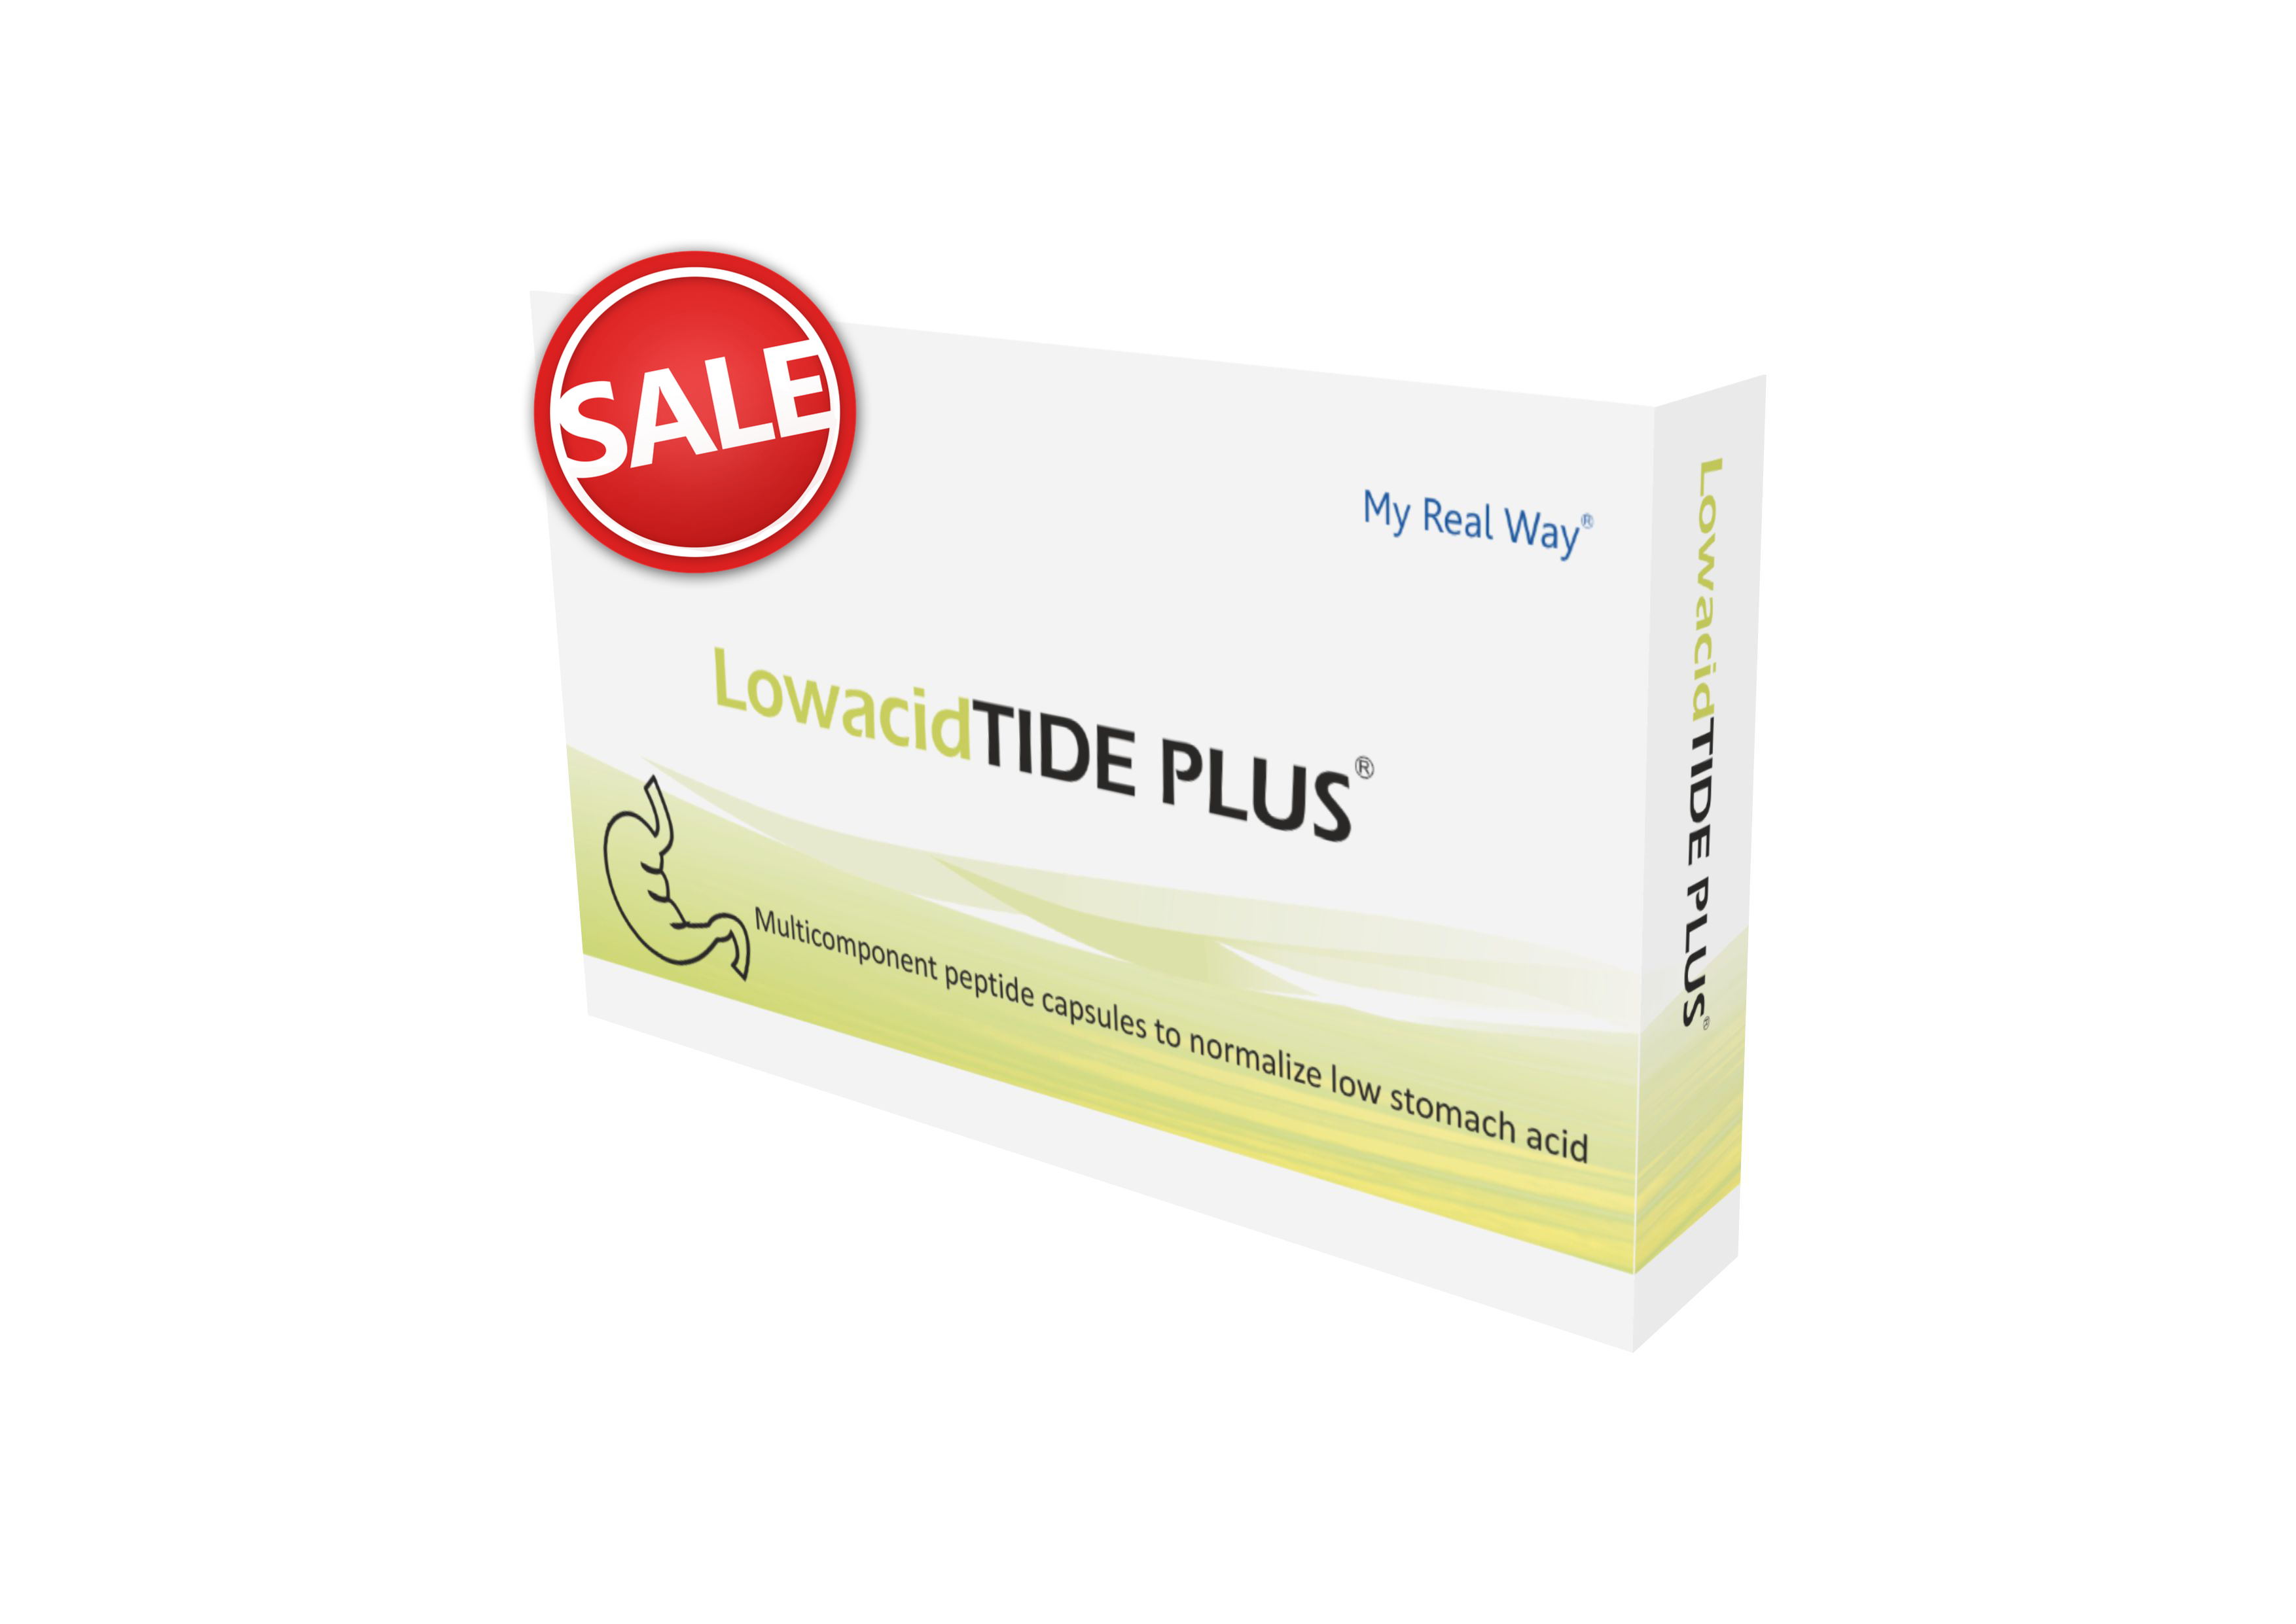 LowacidTIDE PLUS peptides for low stomach acid